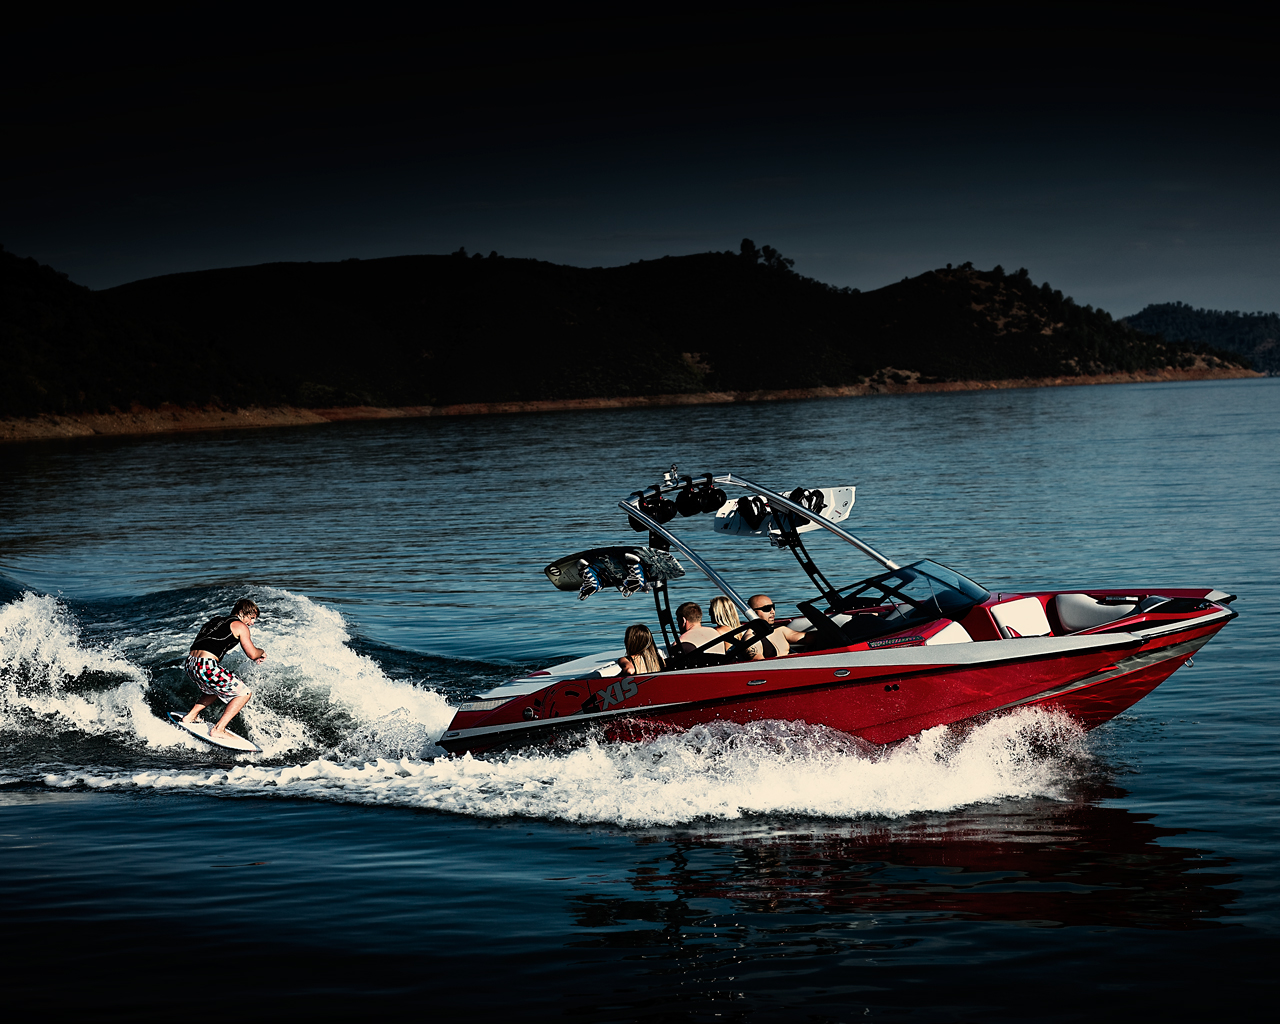 Mastercraft Wallpaper Image Amp Pictures Becuo